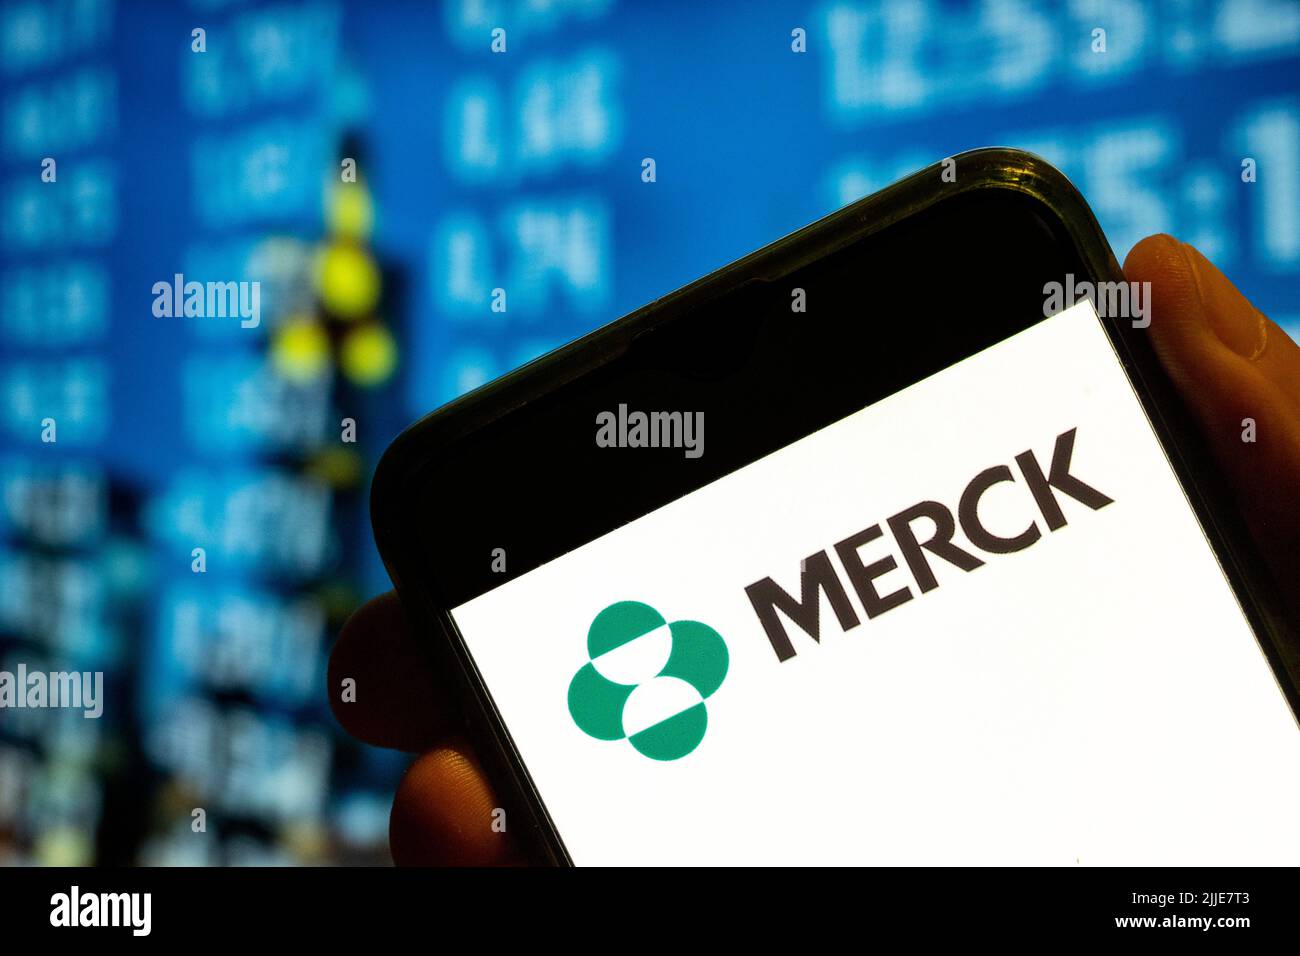 Merck Projects :: Photos, videos, logos, illustrations and